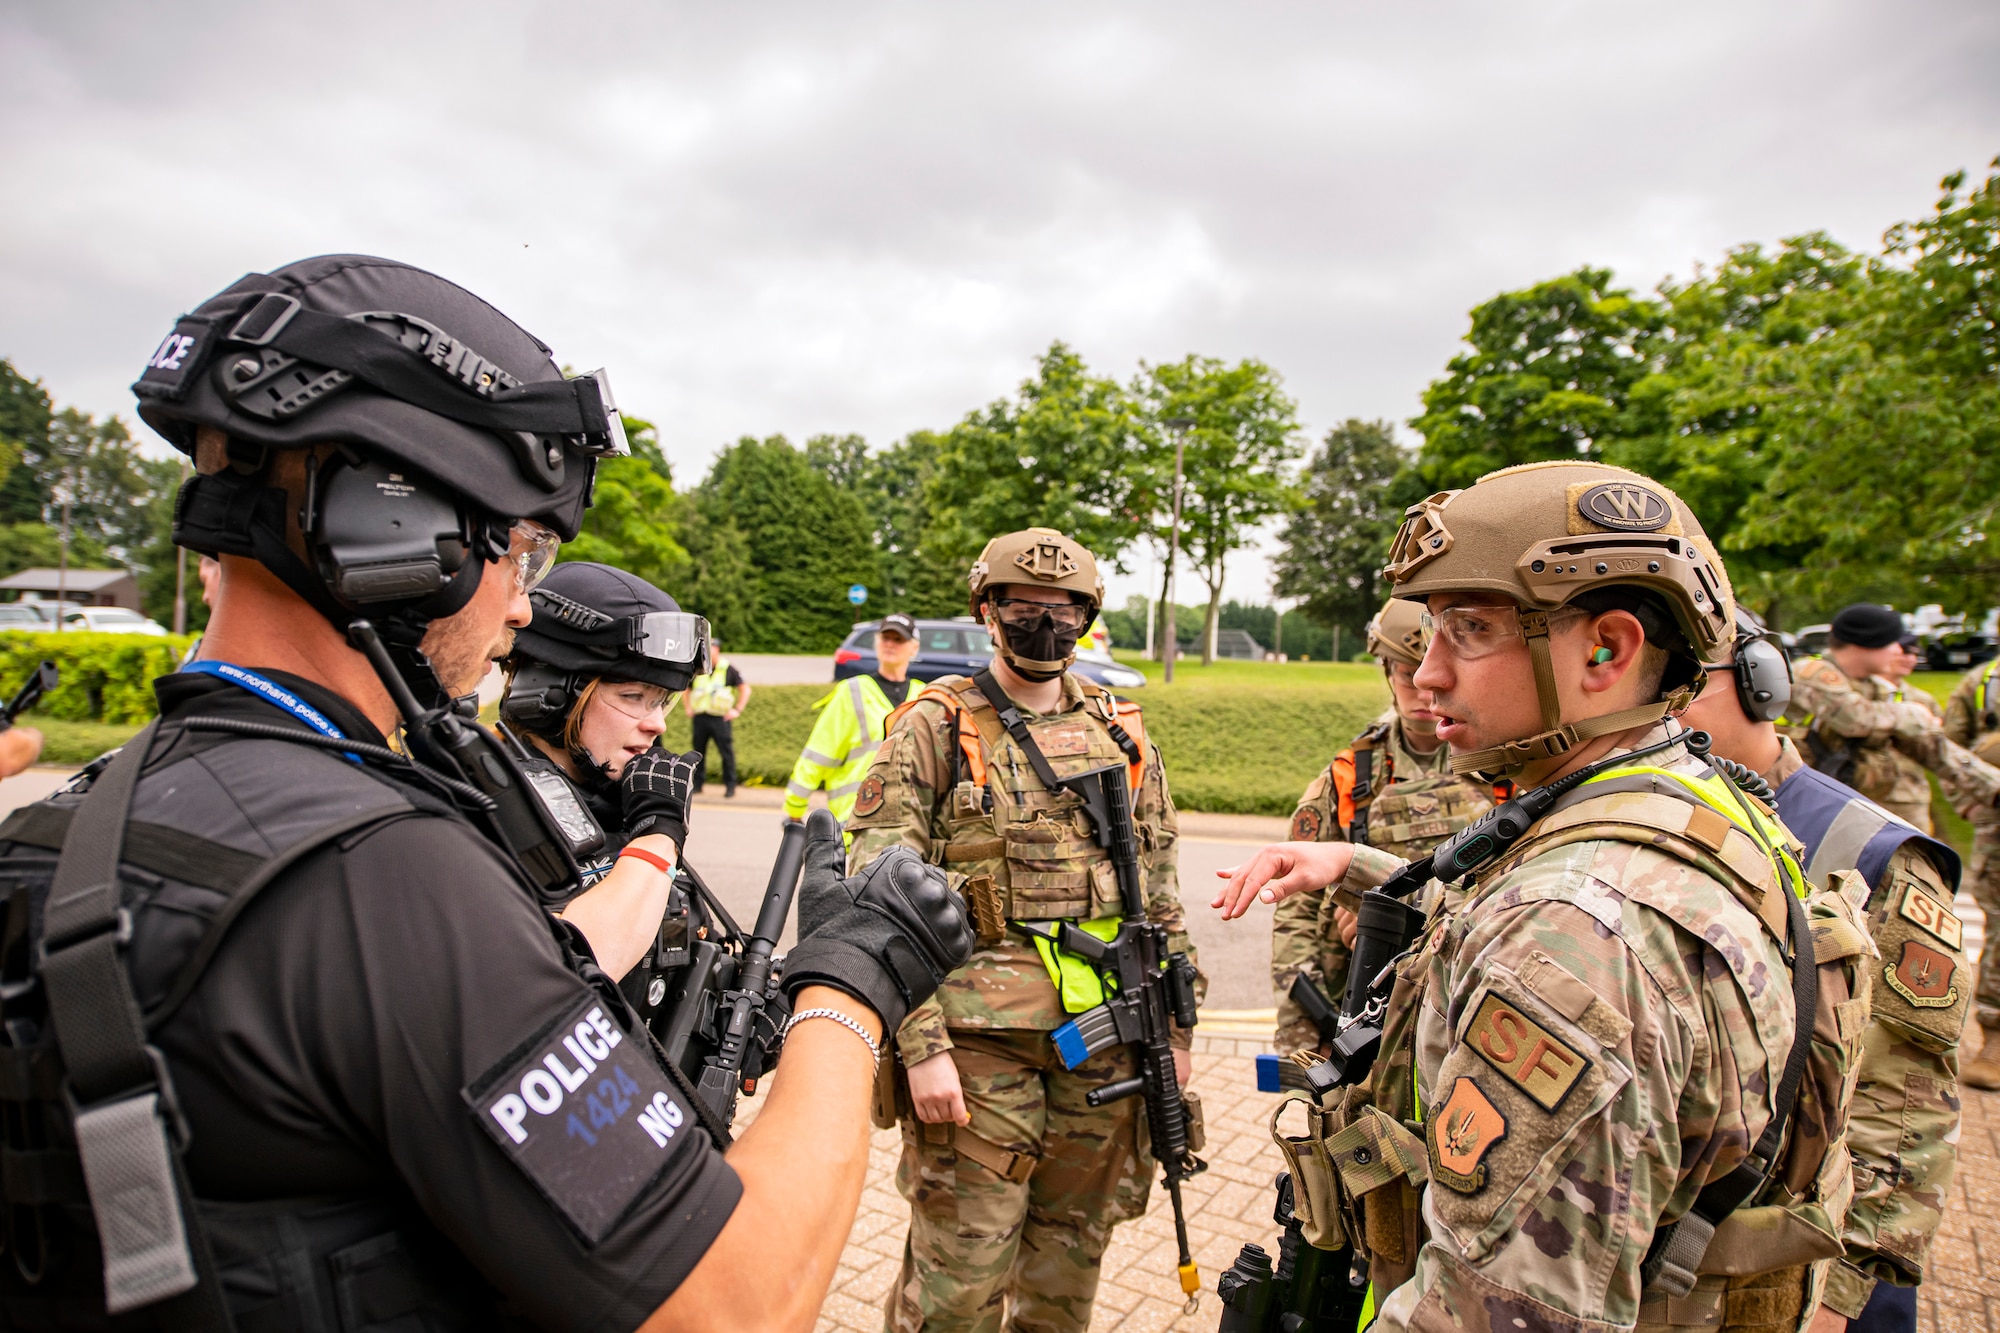 A police officer from the Northamptonshire police department, left, discusses strategy with Airmen from the 422nd Security Forces Squadron prior to a tri-agency active shooter response exercise at RAF Croughton, June 30, 2021. Airmen from the 422nd SFS along with police officers from the NHPD and Ministry of Defense, participated in multiple exercises to enhance their search and seizure tactics, strengthen local ties and gain rapport with their fellow officers. (U.S. Air Force photo by Senior Airman Eugene Oliver)